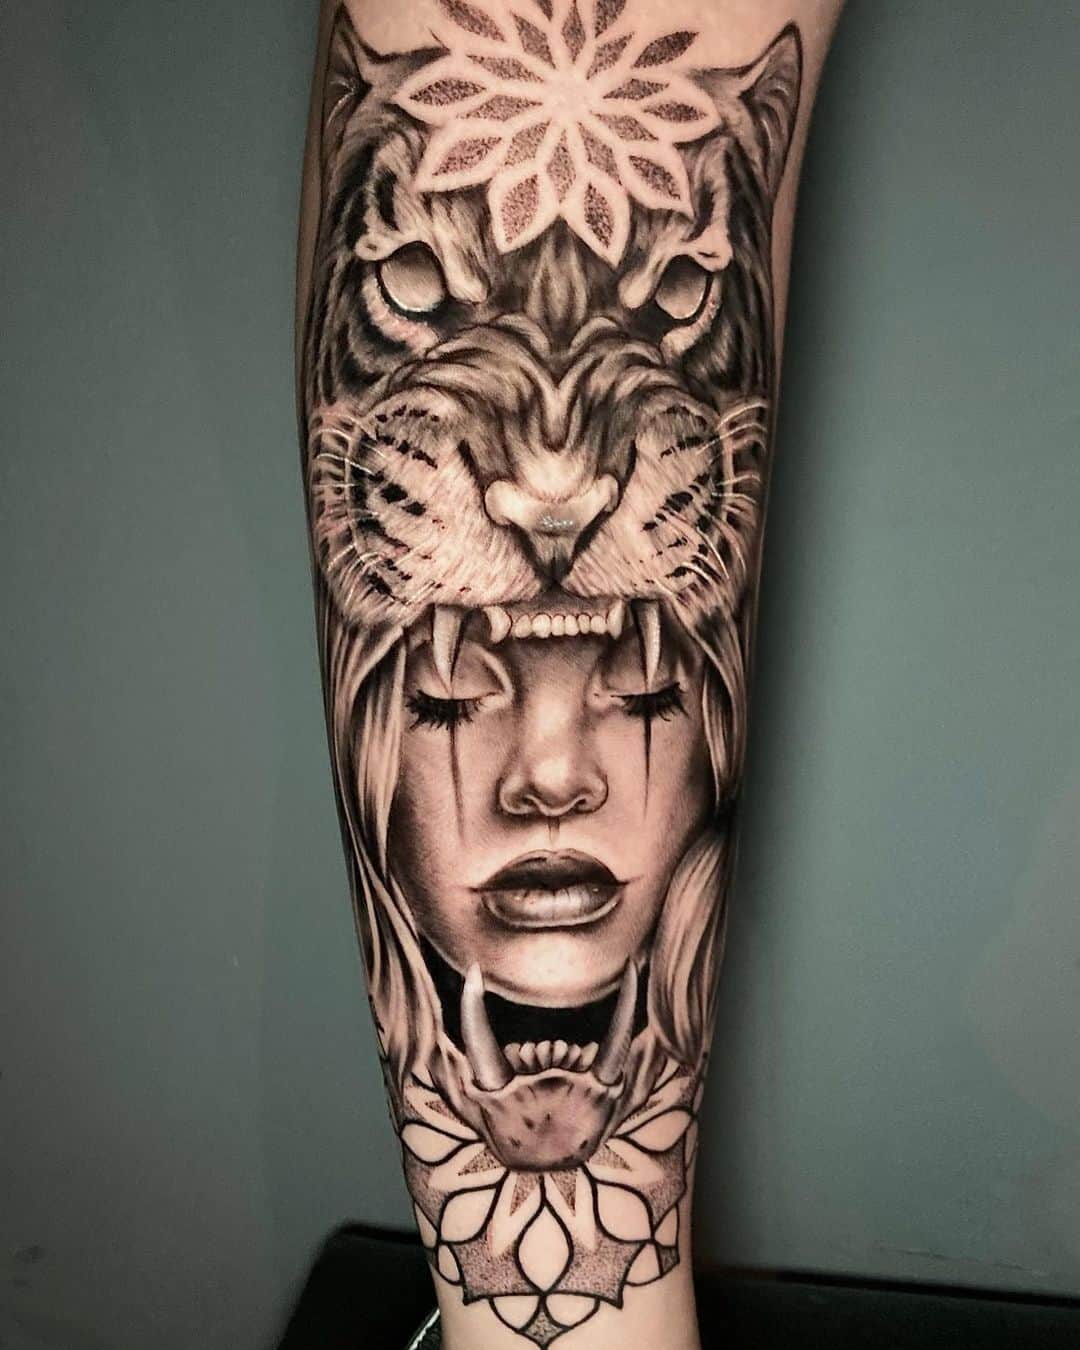 Tiger with girl tattoo by cristovaotattoo